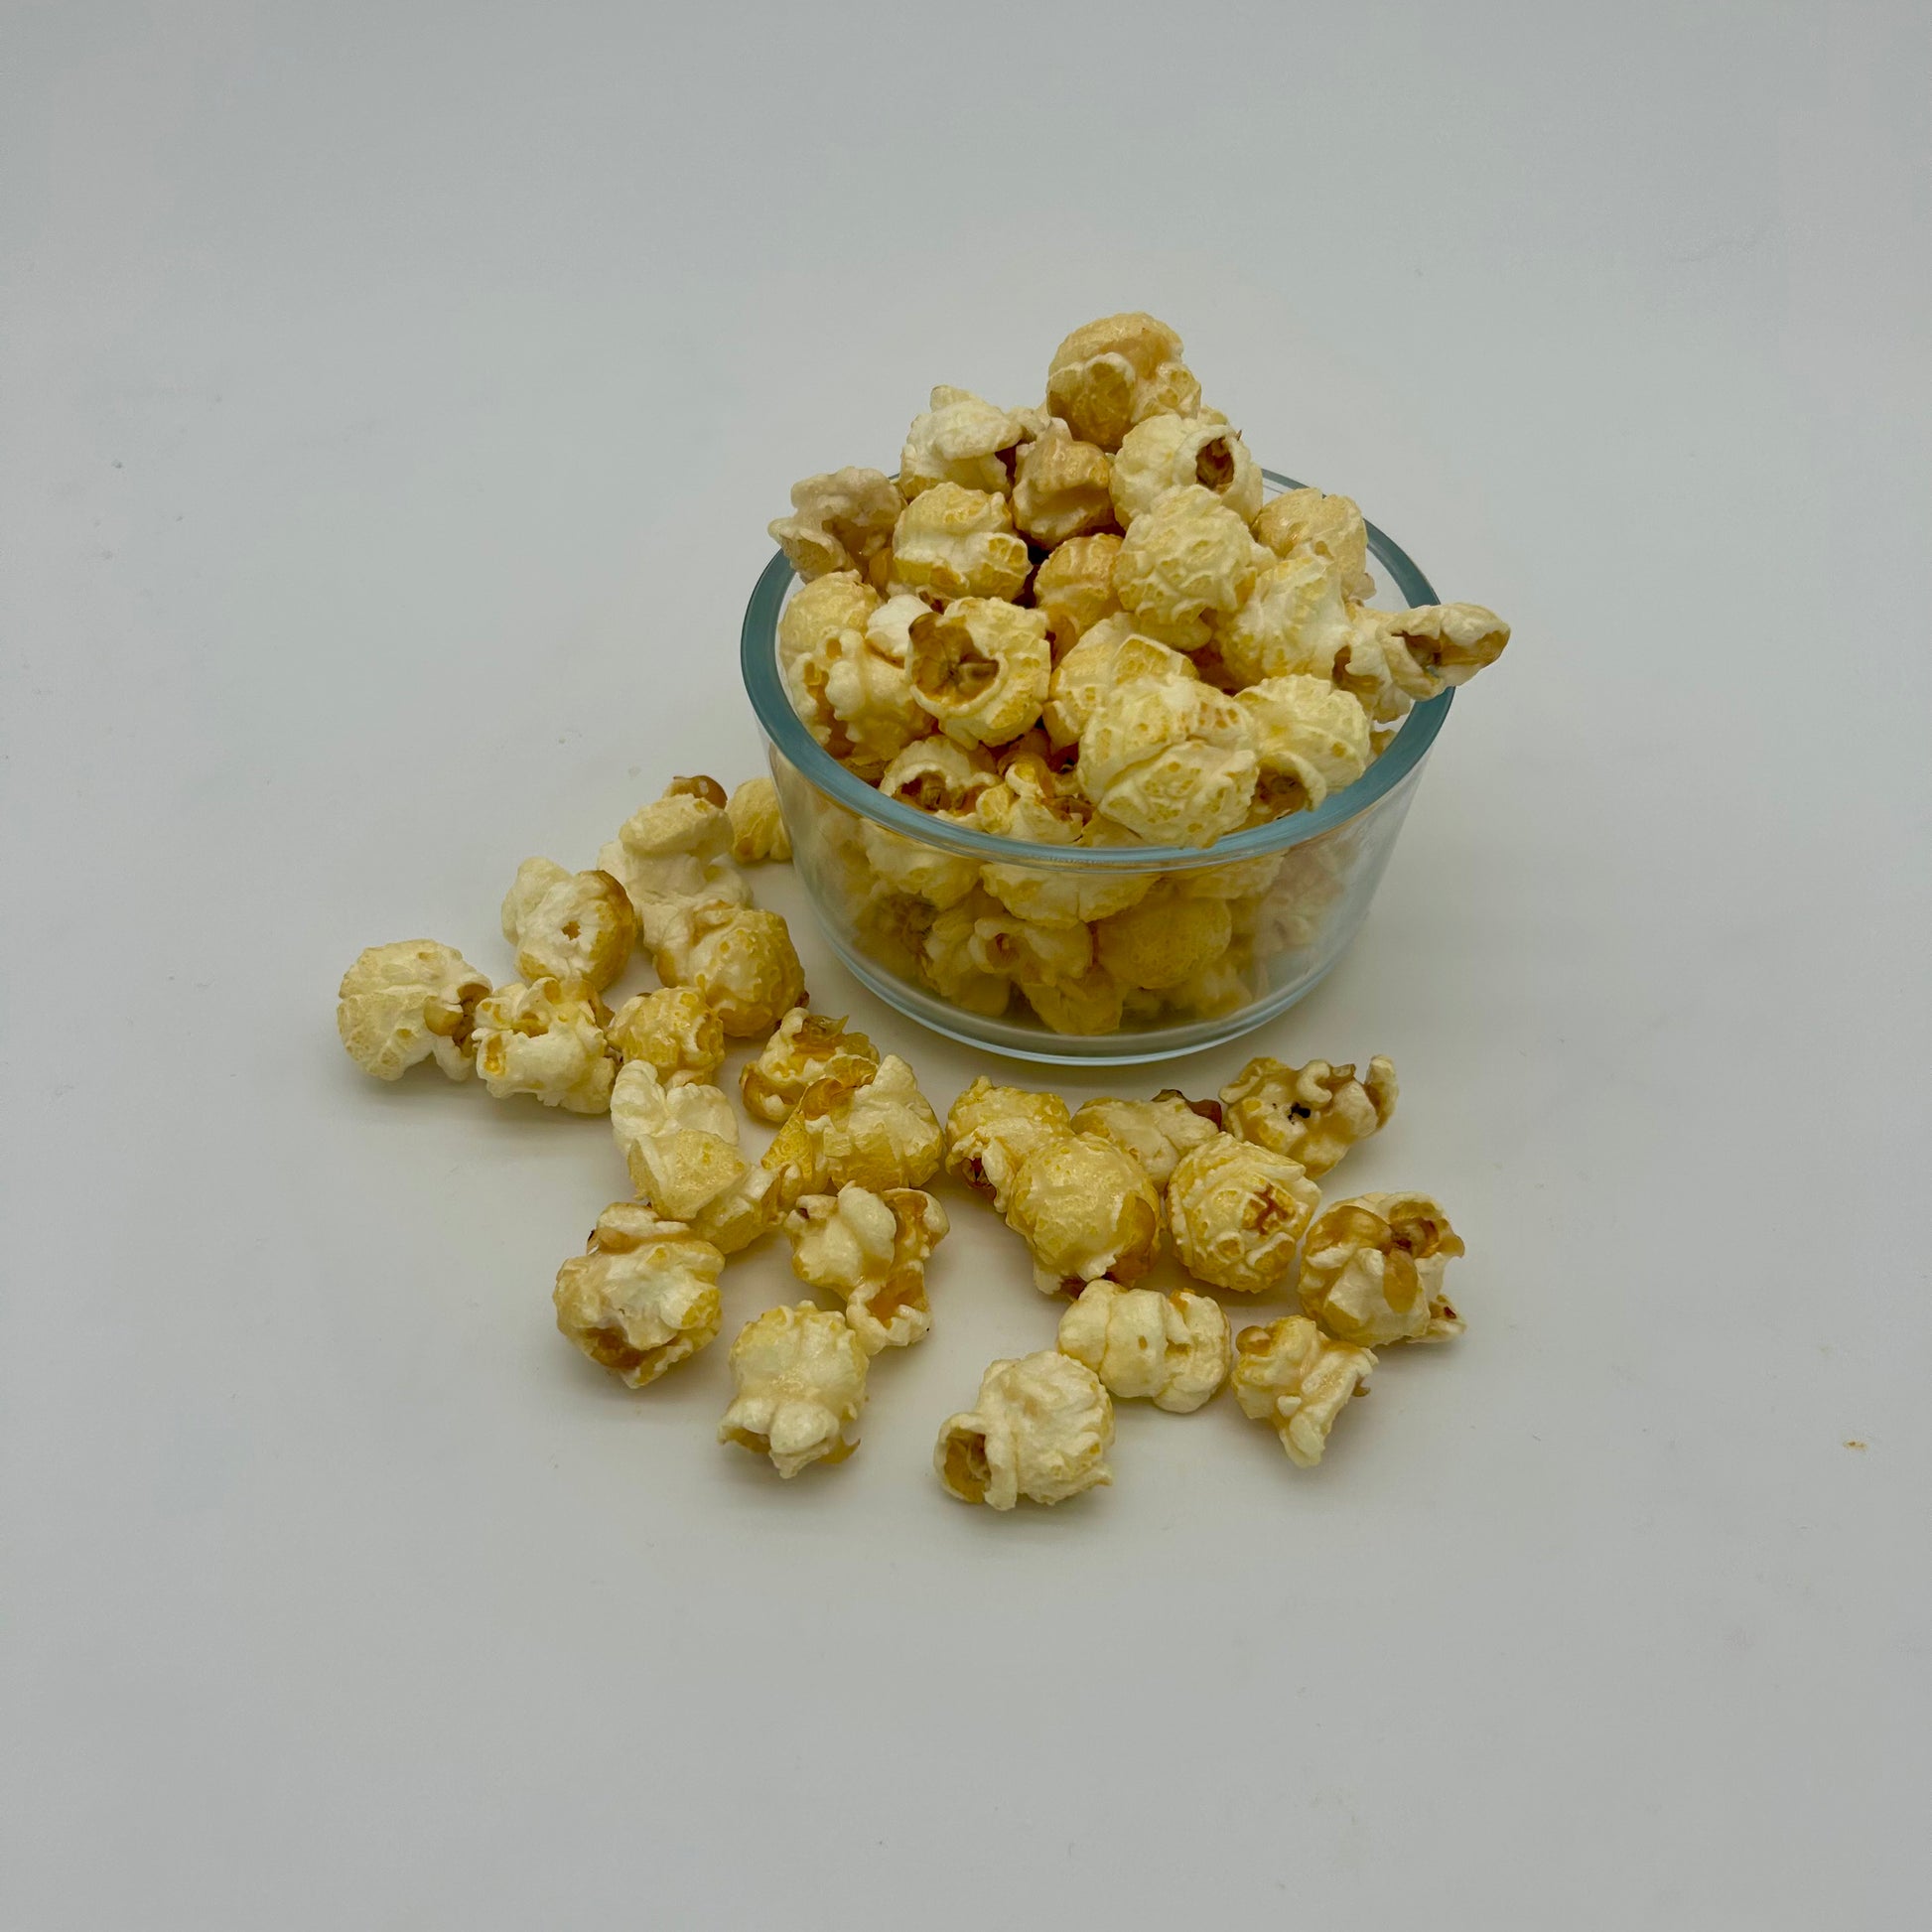 Light and crispy, sweet and salty kettle corn1 